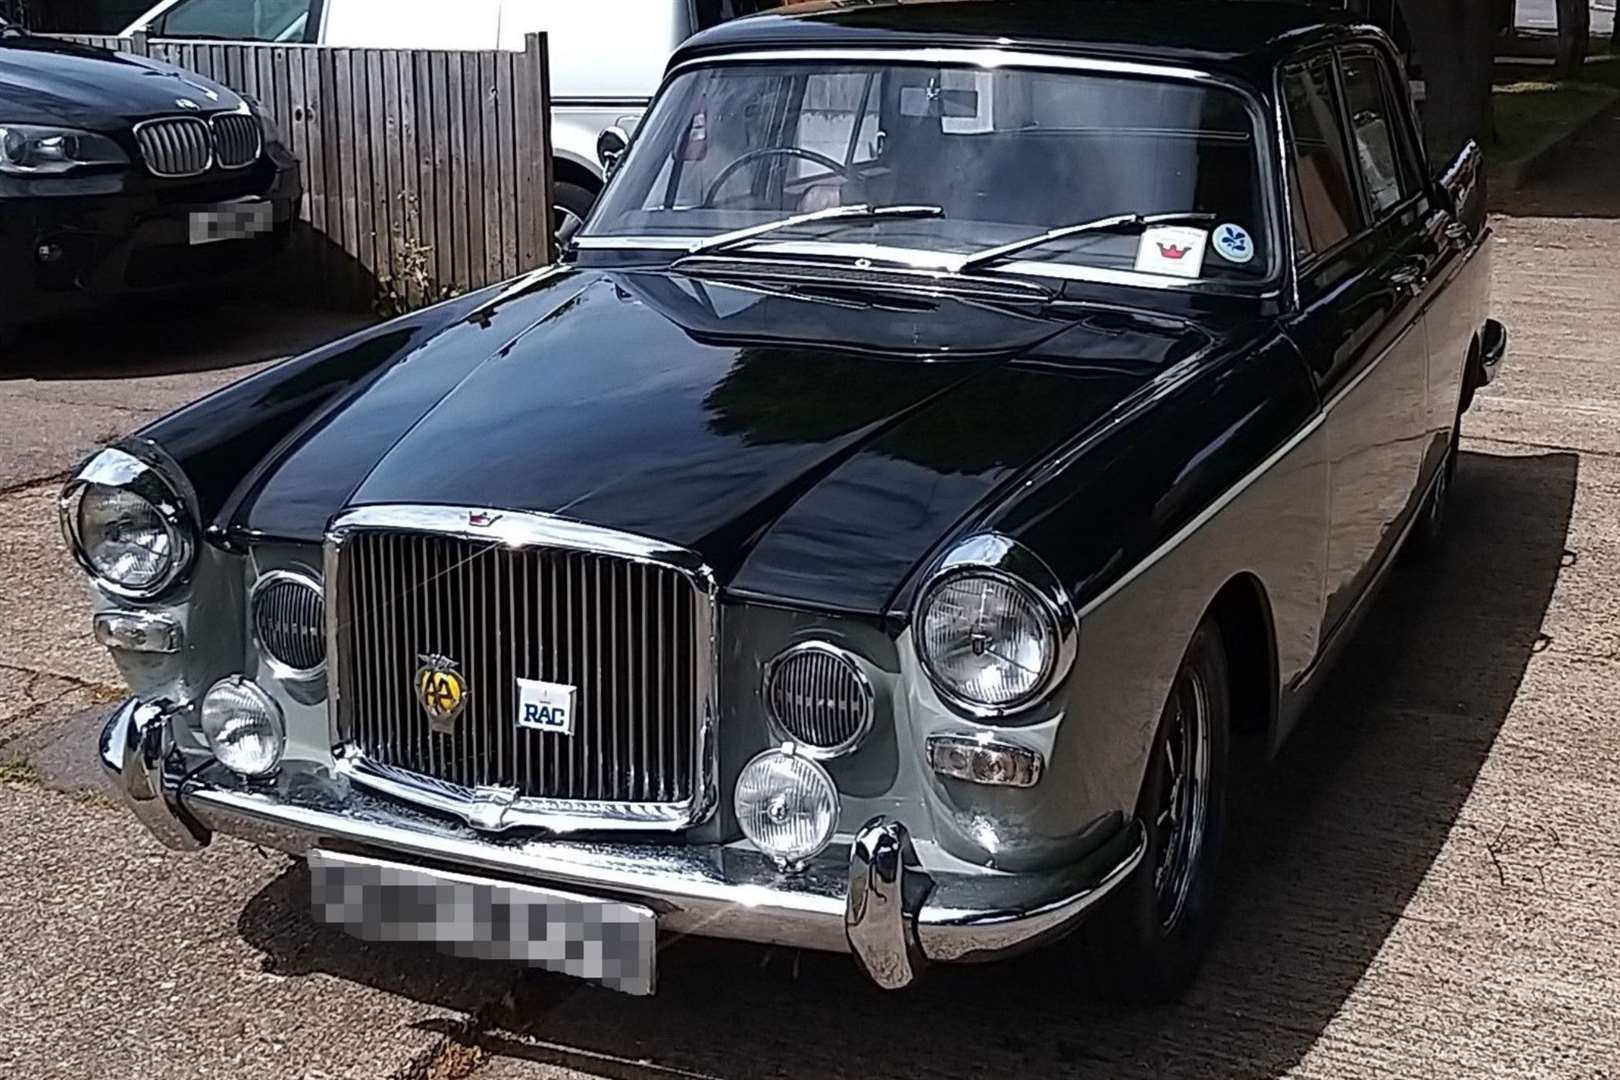 The classic car which has been stolen